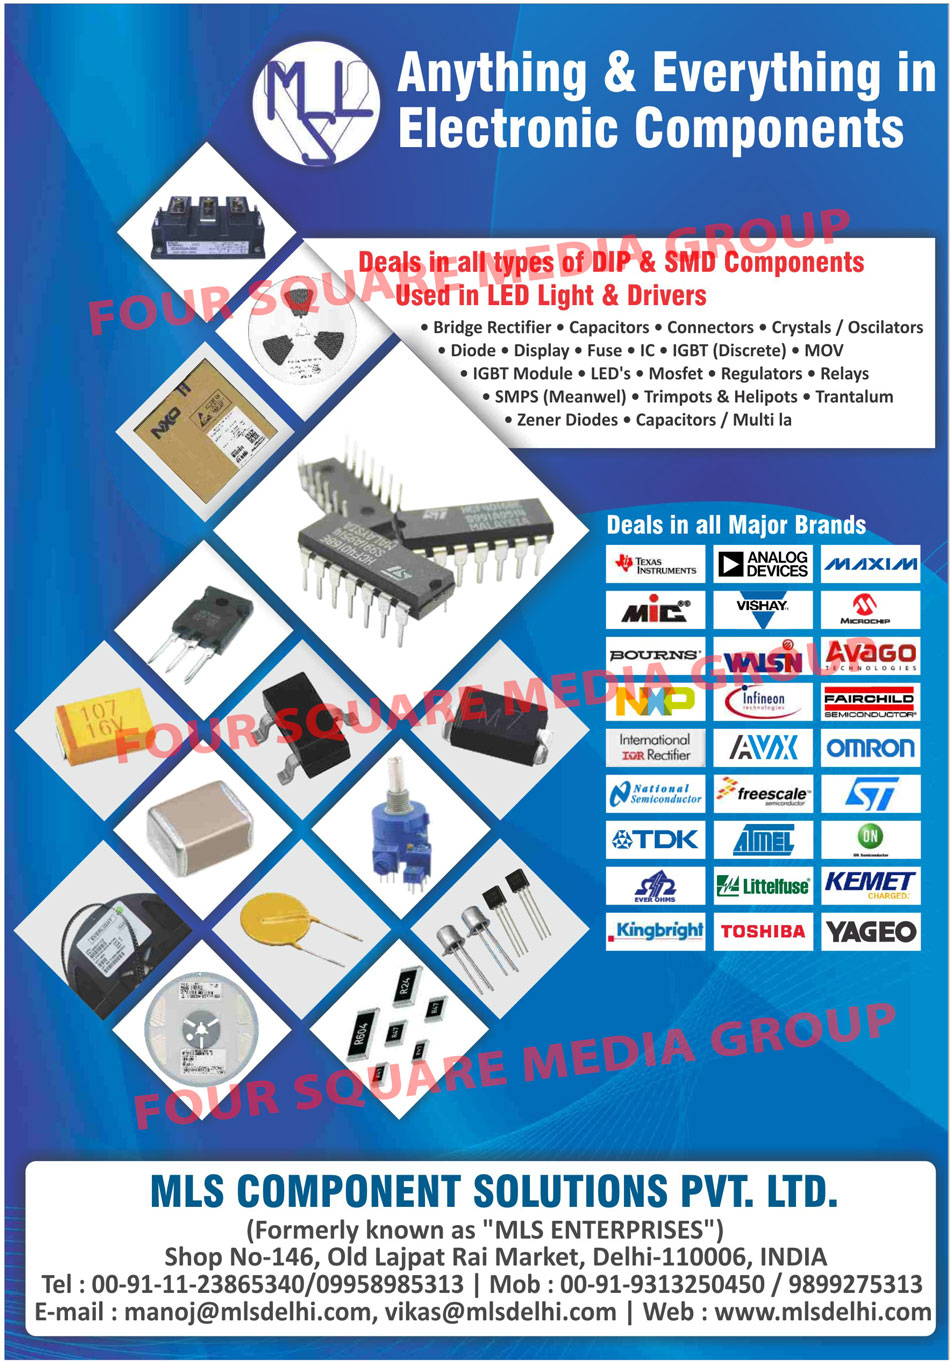 Industrial Electronic Components, SMD Components, Discrete Components, SMD Diodes, SMD Led, SMD Coil, SMD Resistors, SMD Schottky Diodes, SMD Zener, SMD Bridge, SMD Electrolytic Capacitors, SMD Tantlam, SMD IC, SMD PF, Capacitors, Fuse, Integrated Circuits, IGBT, Mosfet, MOV, SCR Diode Module, Regulators, Resistors, Display, Crystals, Oscillators, Diode, Trimpot, Transistors,Transister, SDM Tantlam, Bridge Rectifier, Connectors, IGBT Modules, Led, Relays, Zener Diodes, DIP Component, SMPS, Helipot, Trantalum, Multi Layer Capacitor